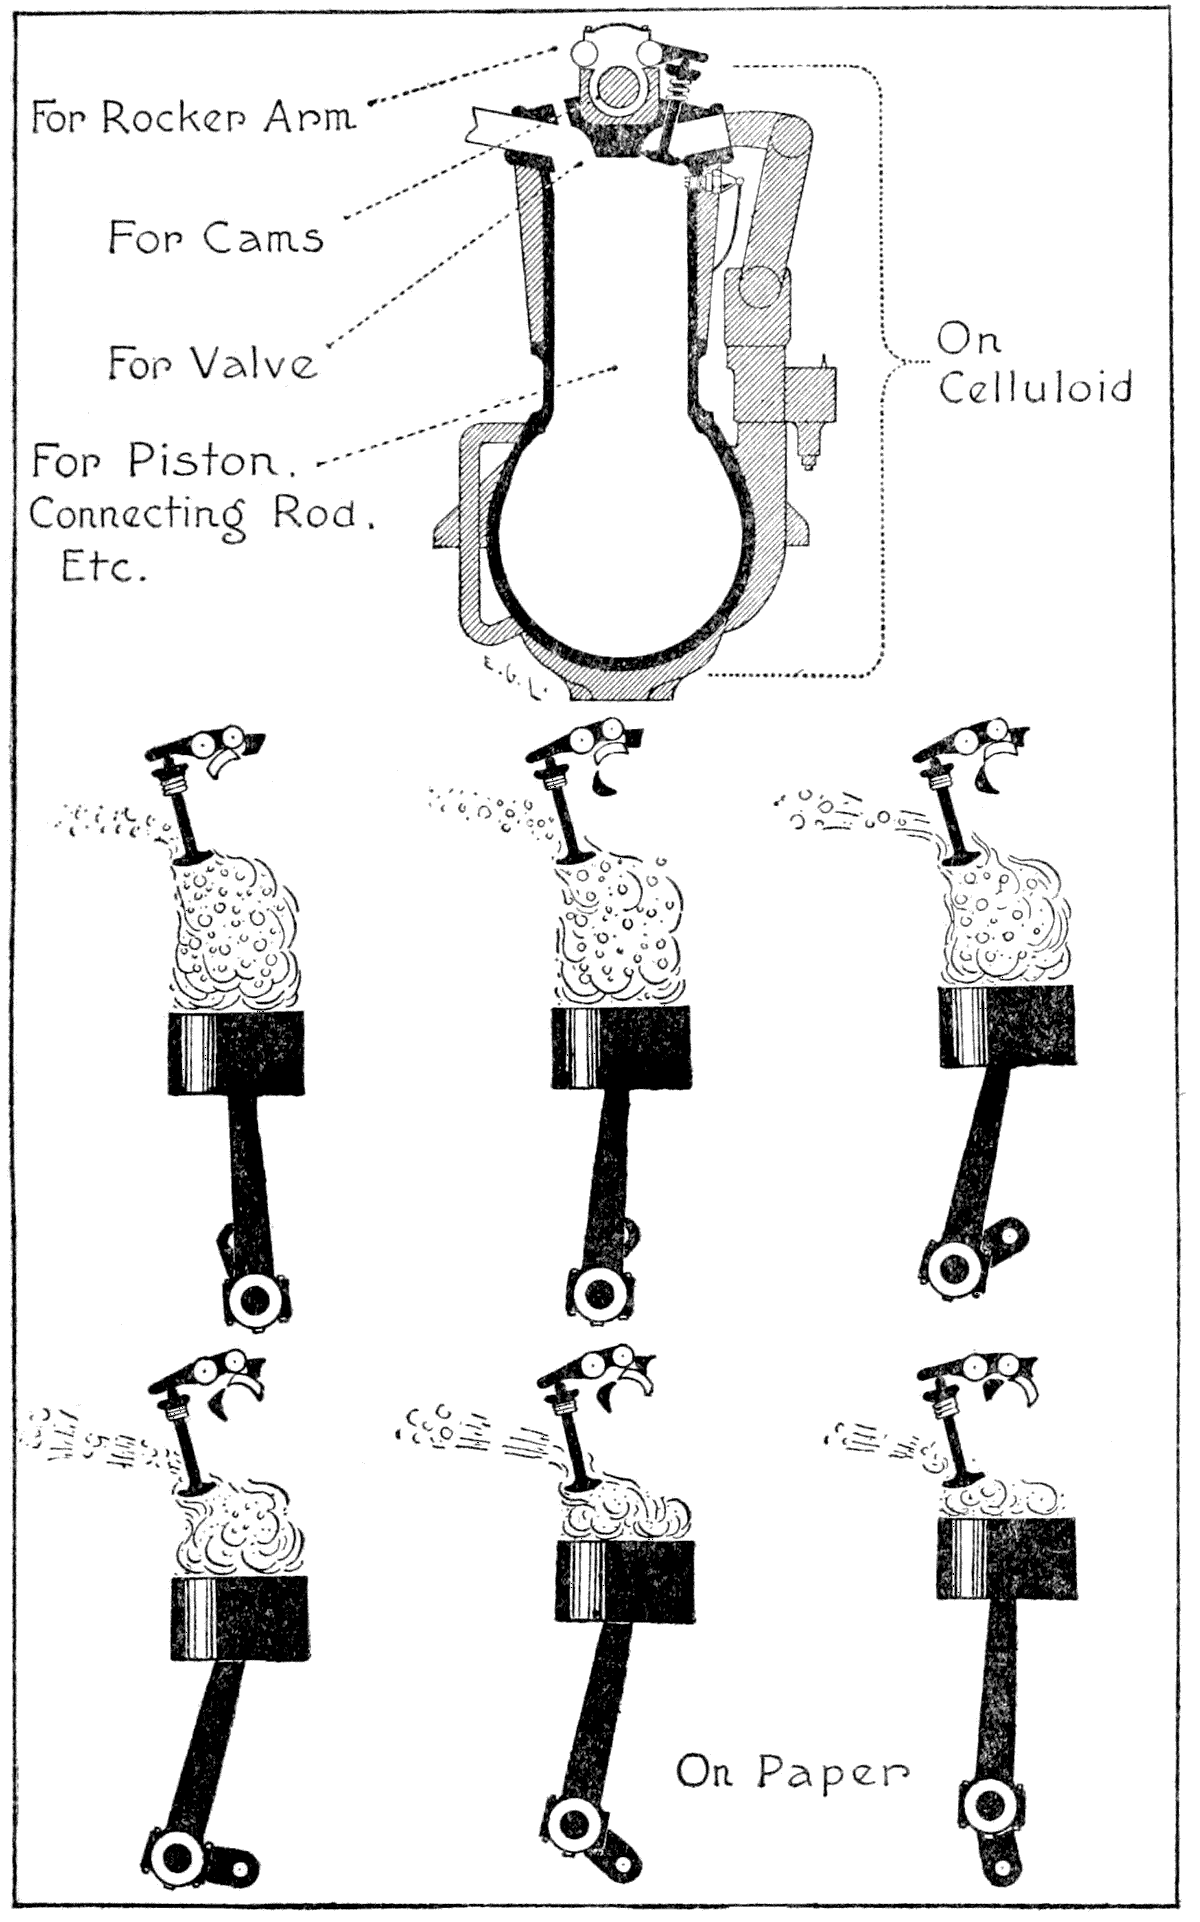 On Celluloid: For Roker Arm; For Cams; For Valve;  For Piston, Connecting Rod, etc; On Paper (Pistons)